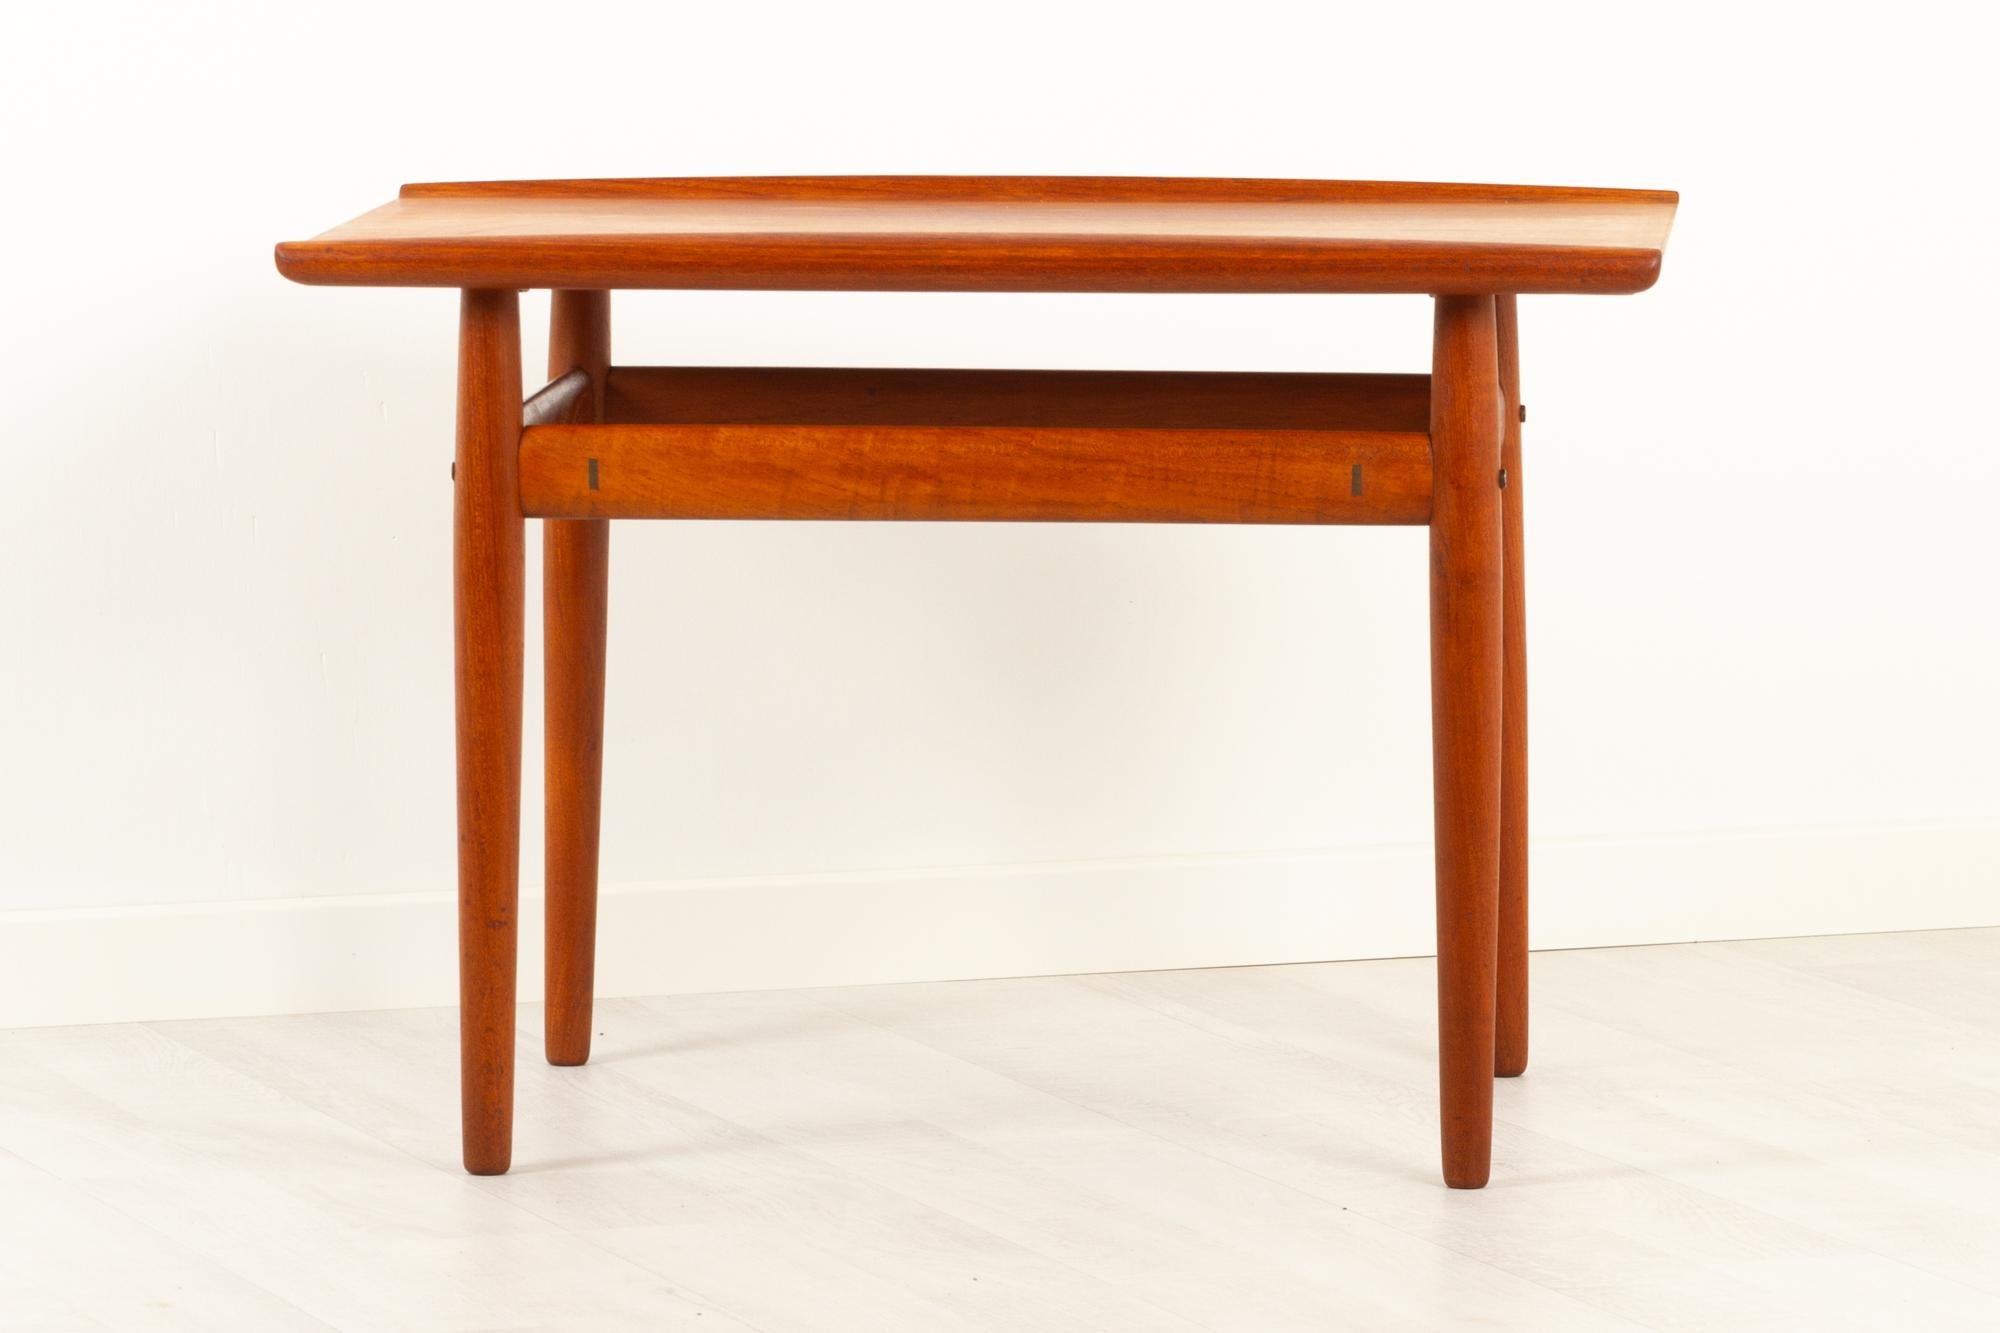 Vintage Danish Teak Side Table by Grete Jalk for Glostrup Møbelfabrik, 1960s In Good Condition For Sale In Asaa, DK